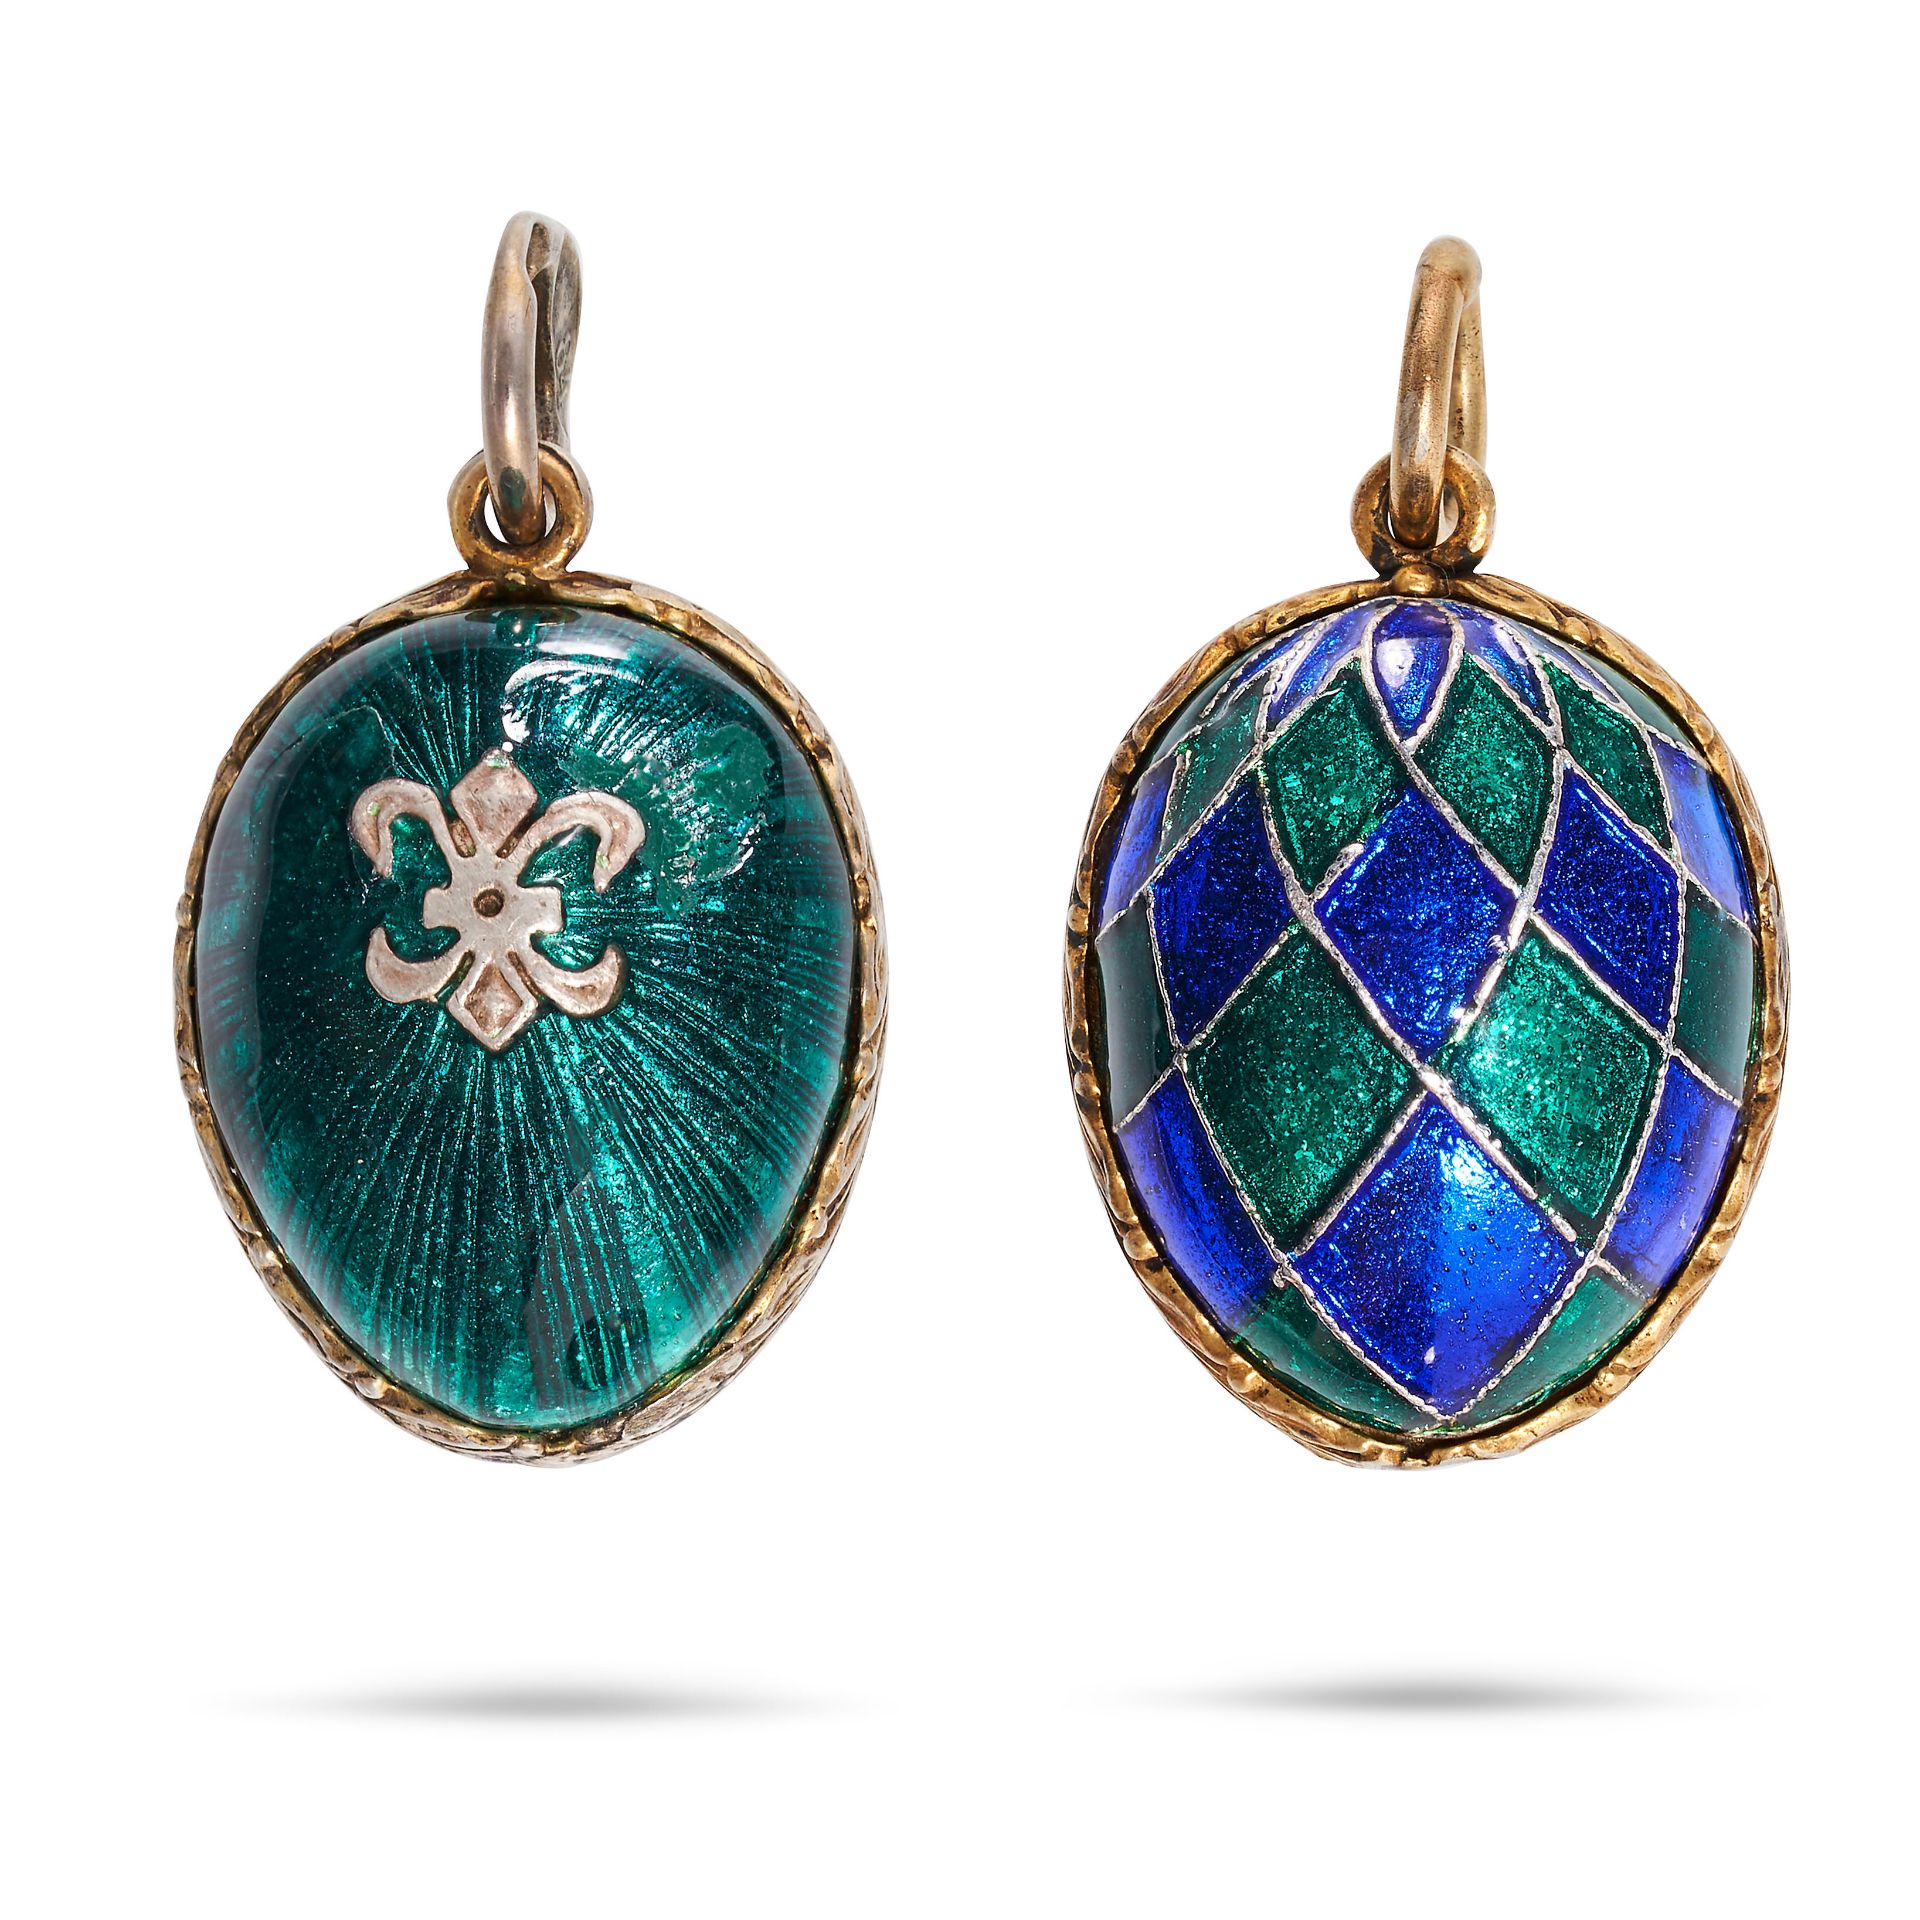 NO RESERVE - TWO ENAMEL EGG CHARMS / PENDANTS in silver gilt, one relieved in emerald green guill...